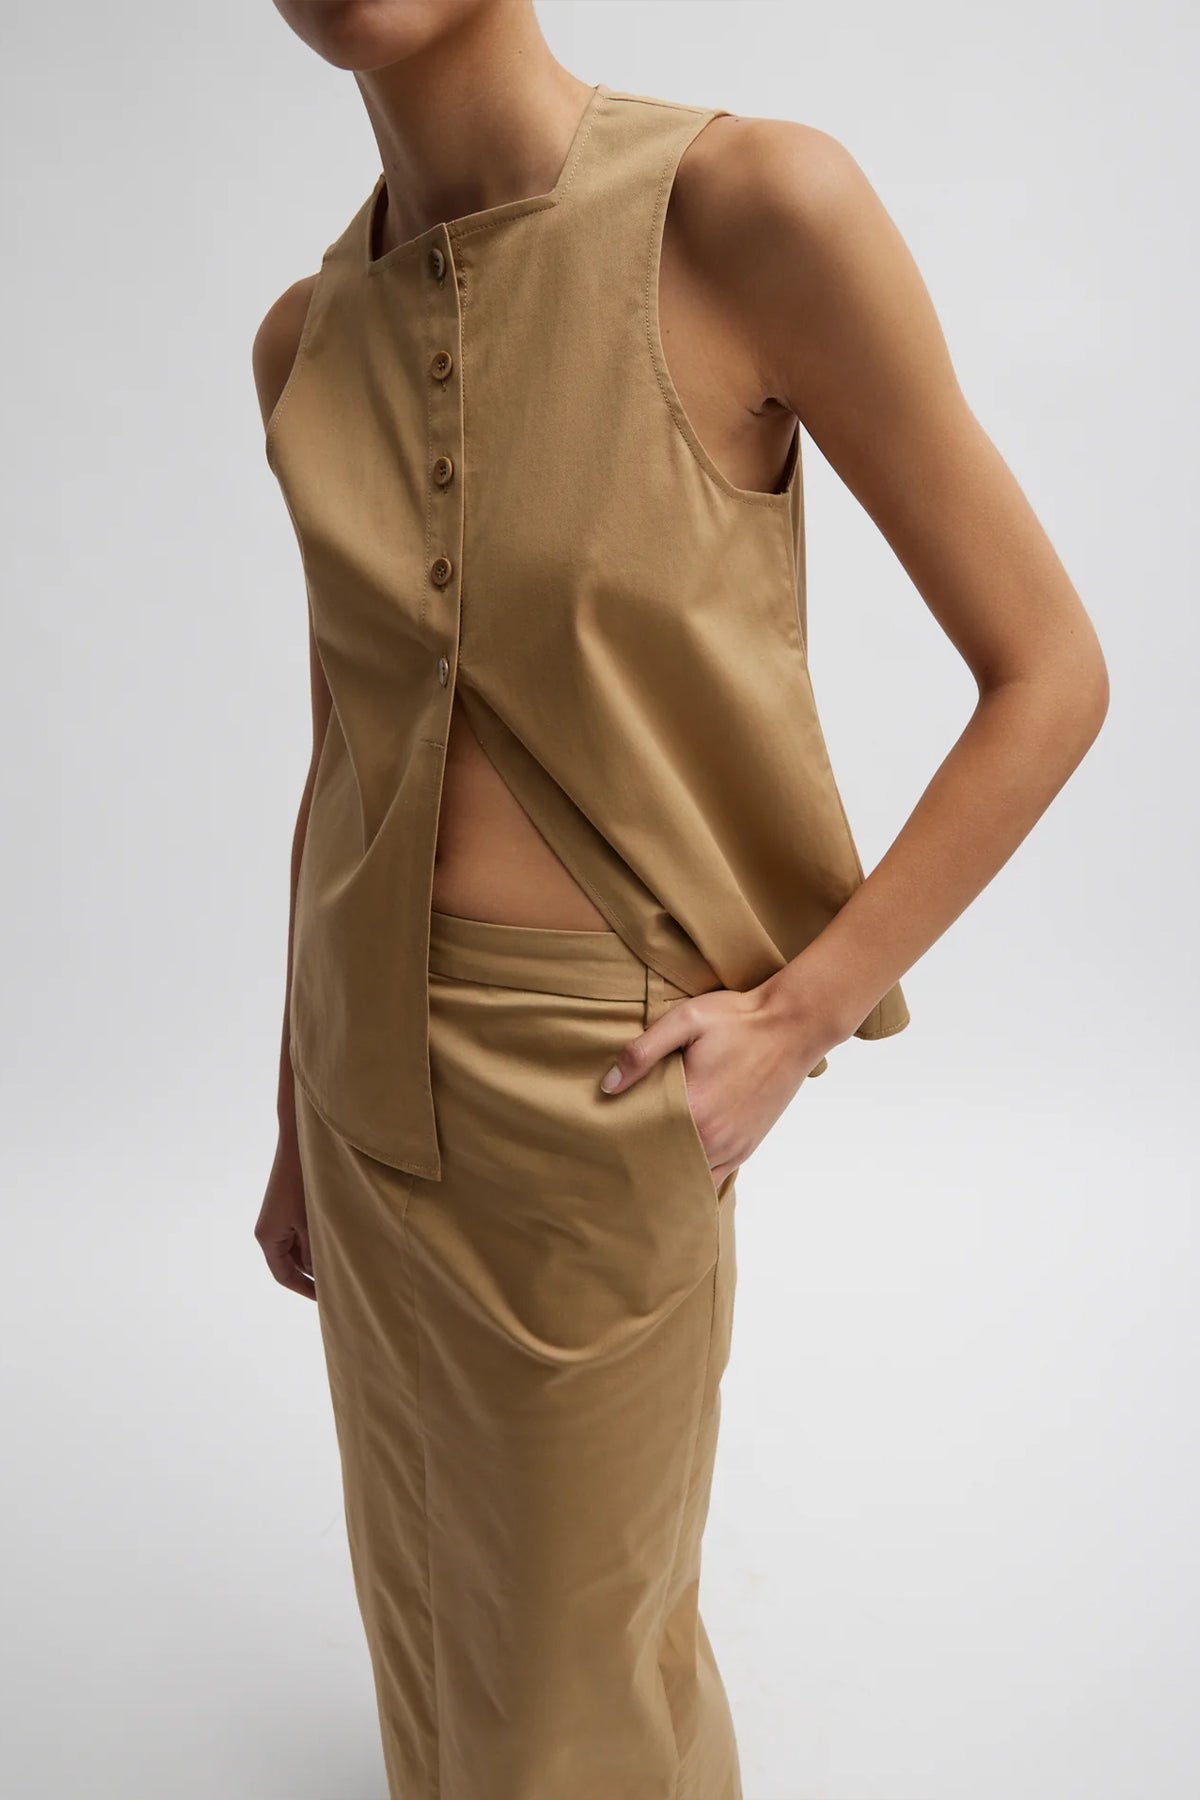 Chino Slit Front Sleeveless Top in Tan - shop-olivia.com